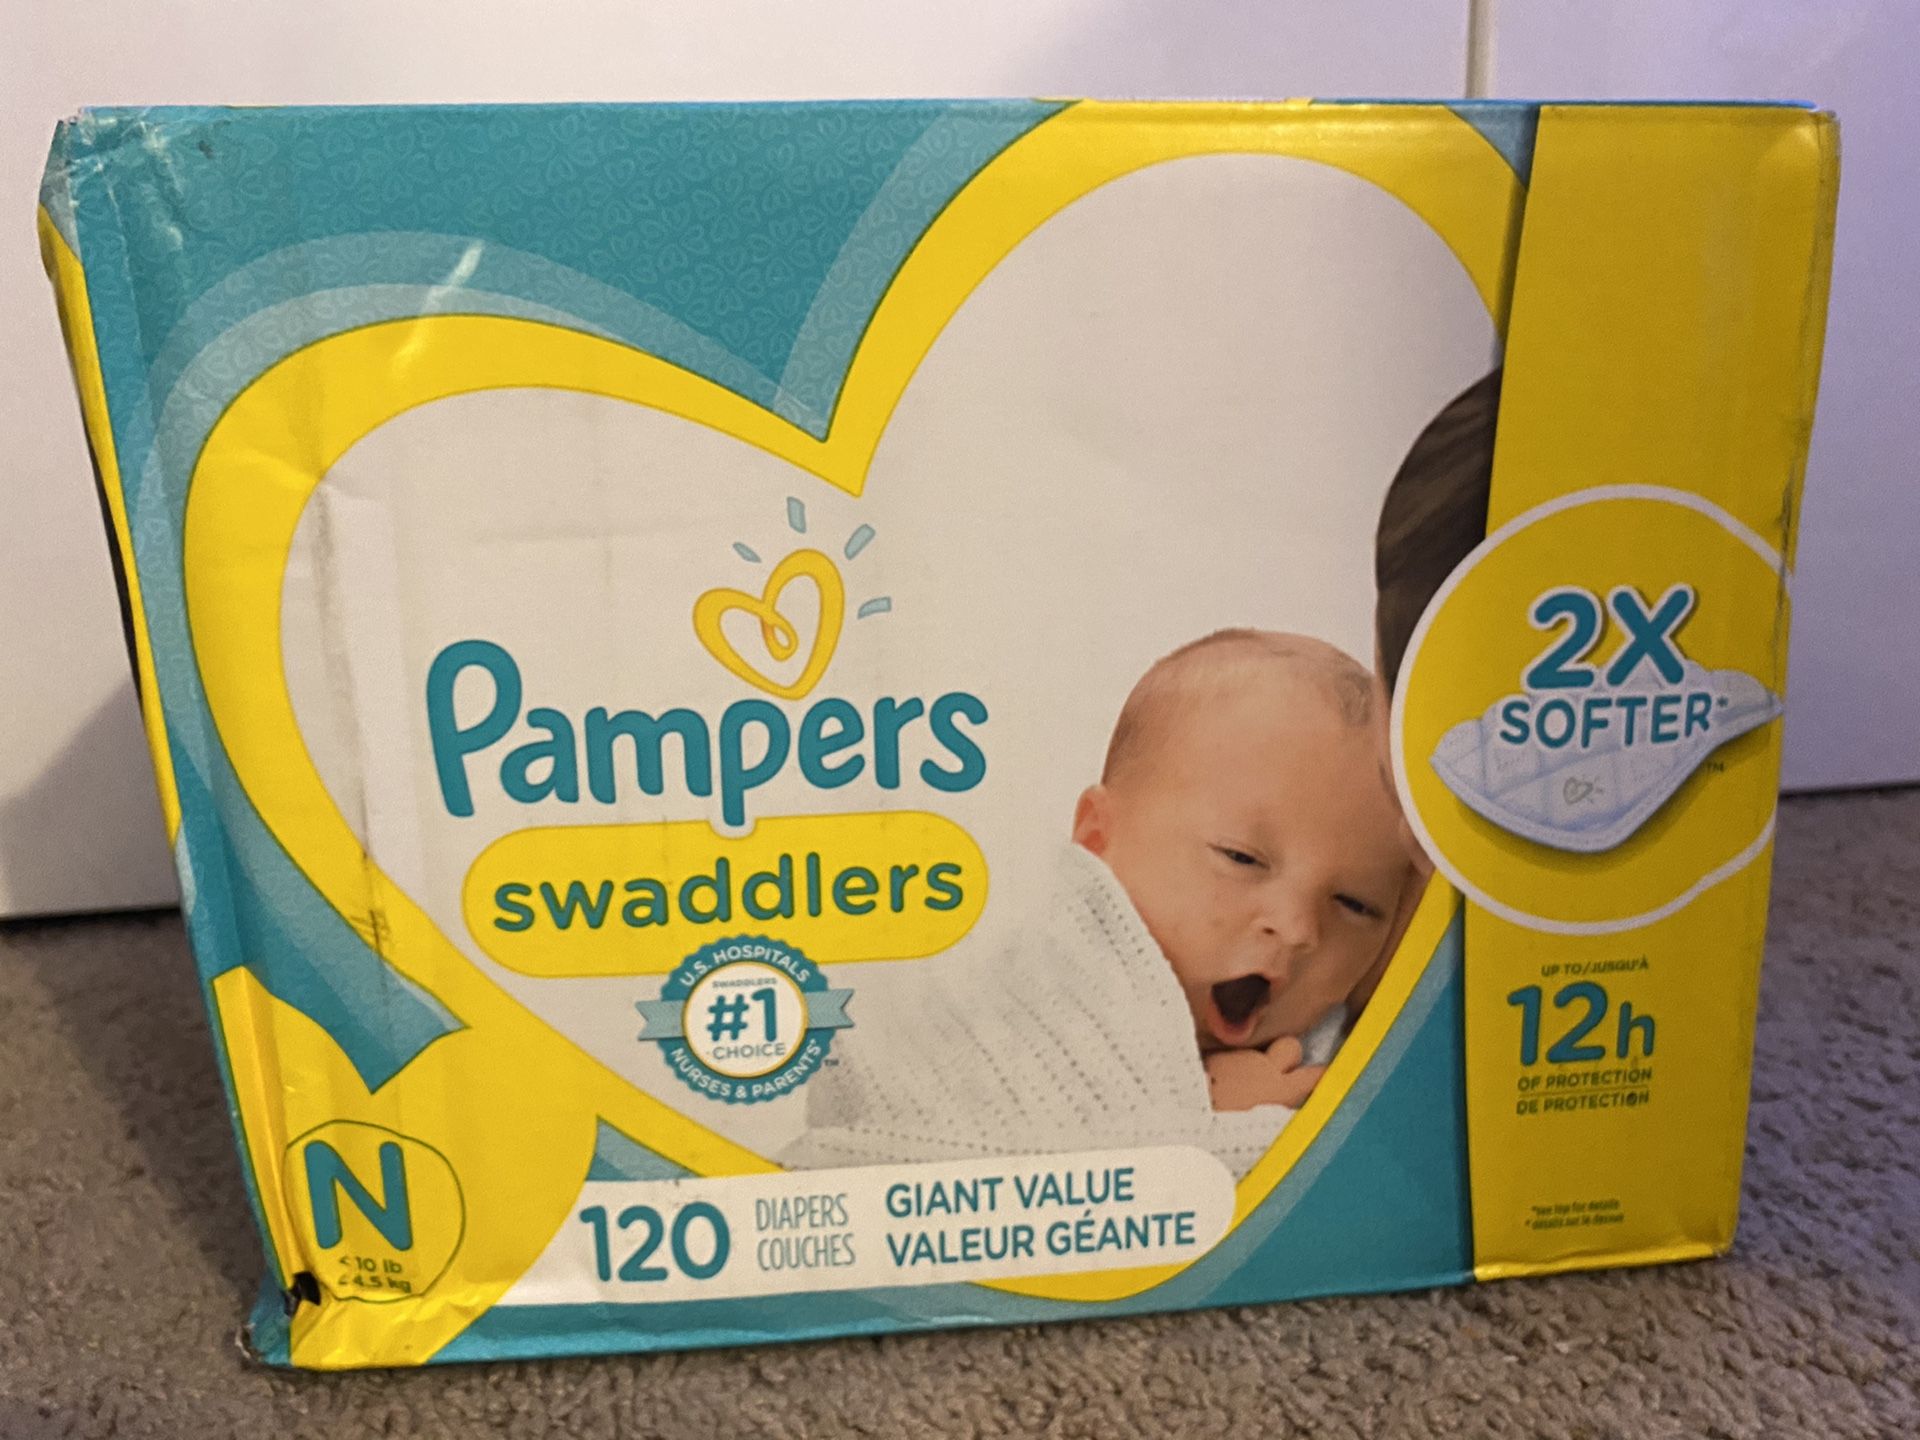 Pampers Newborn Diapers - 120 ct